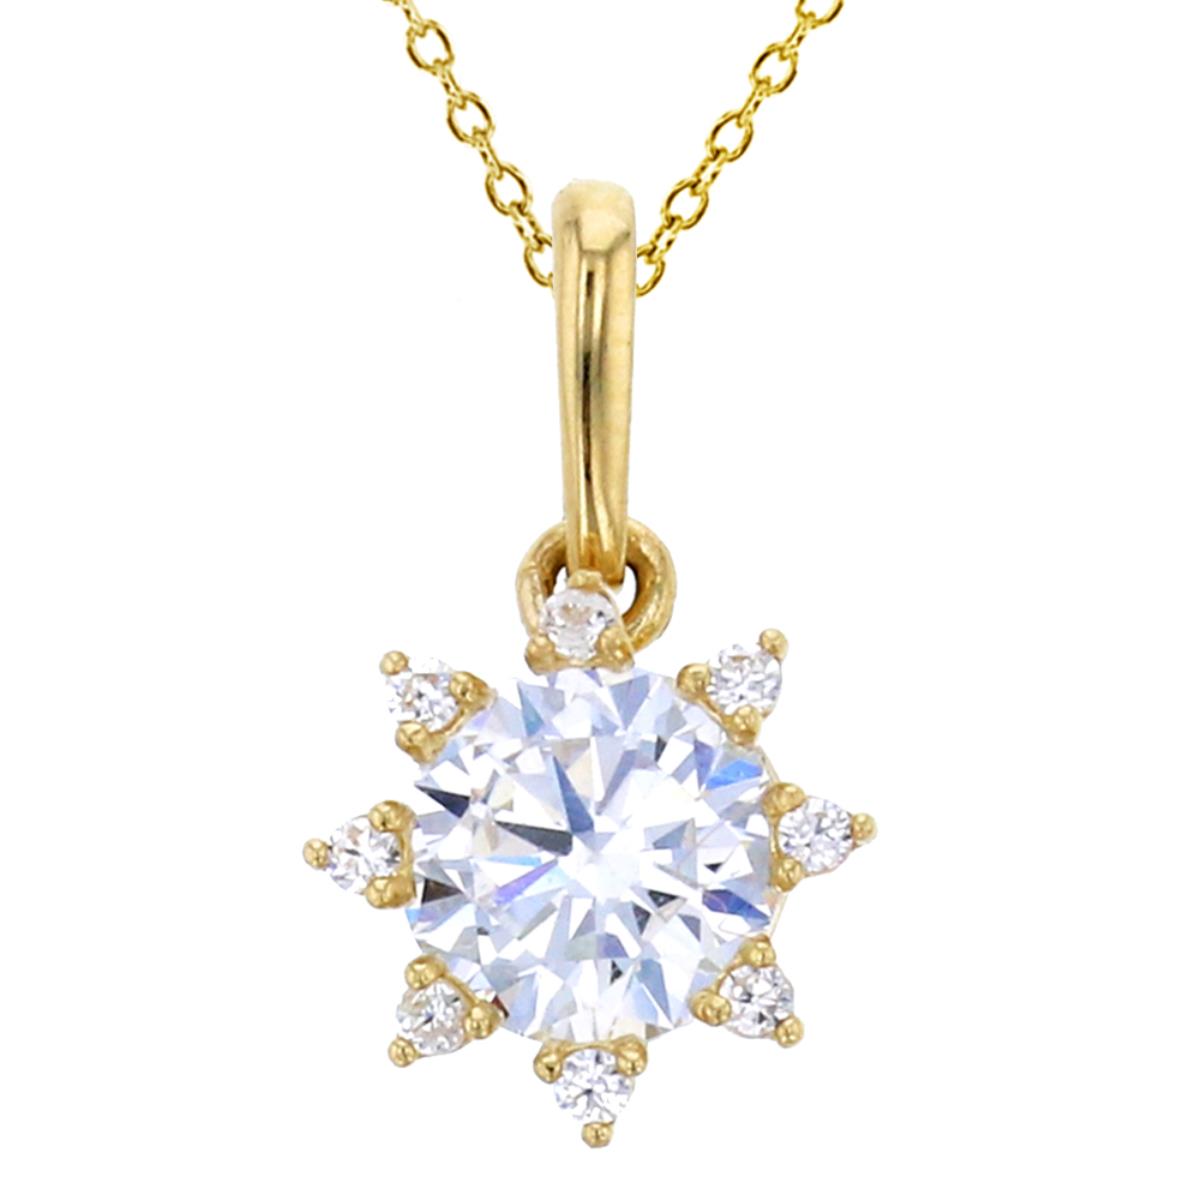 10K Yellow Gold 5mm Round Cut CZ Sun Dangling 18" Necklace